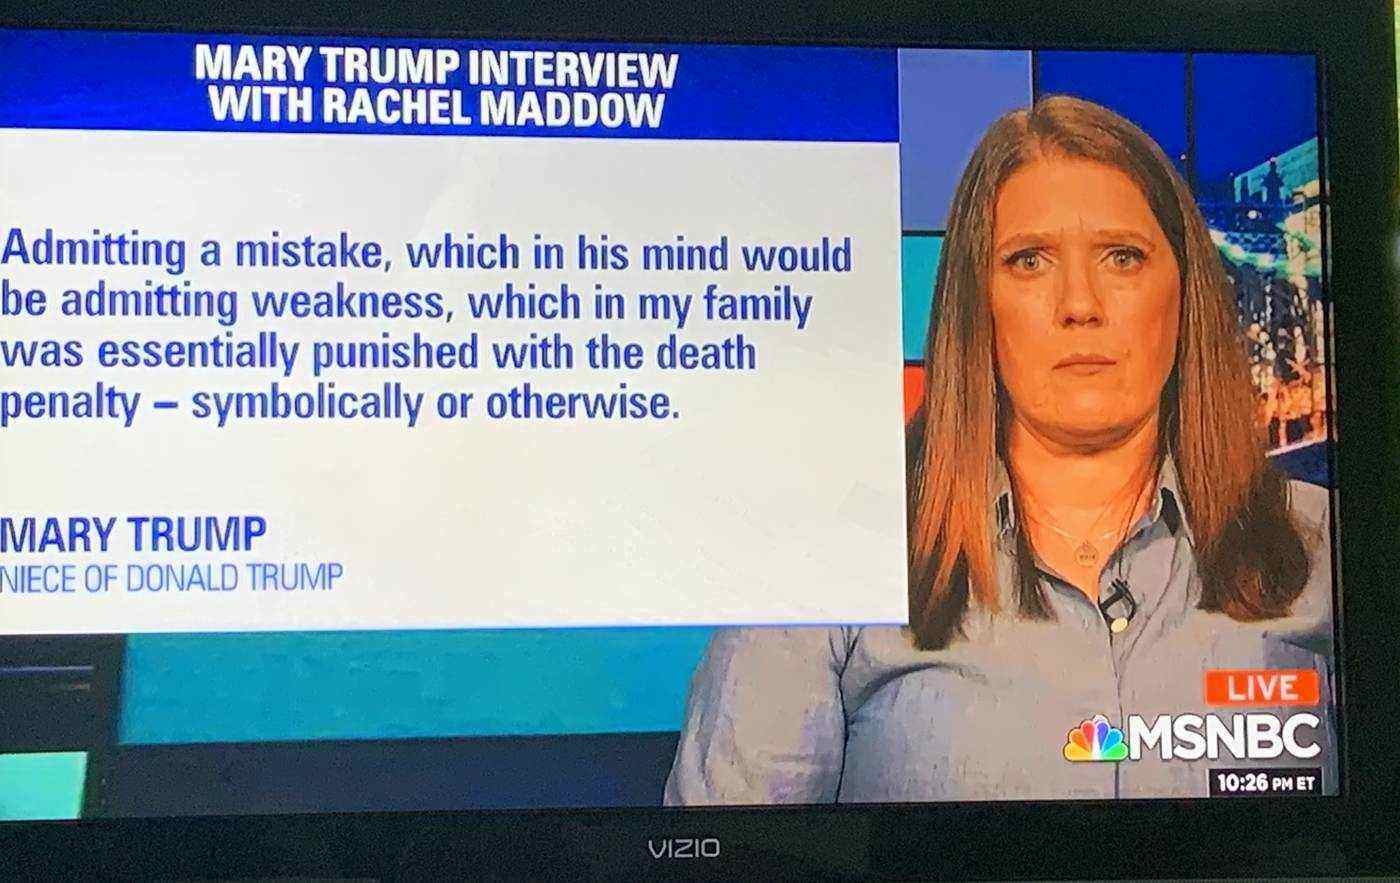 Quote from Mary Trump